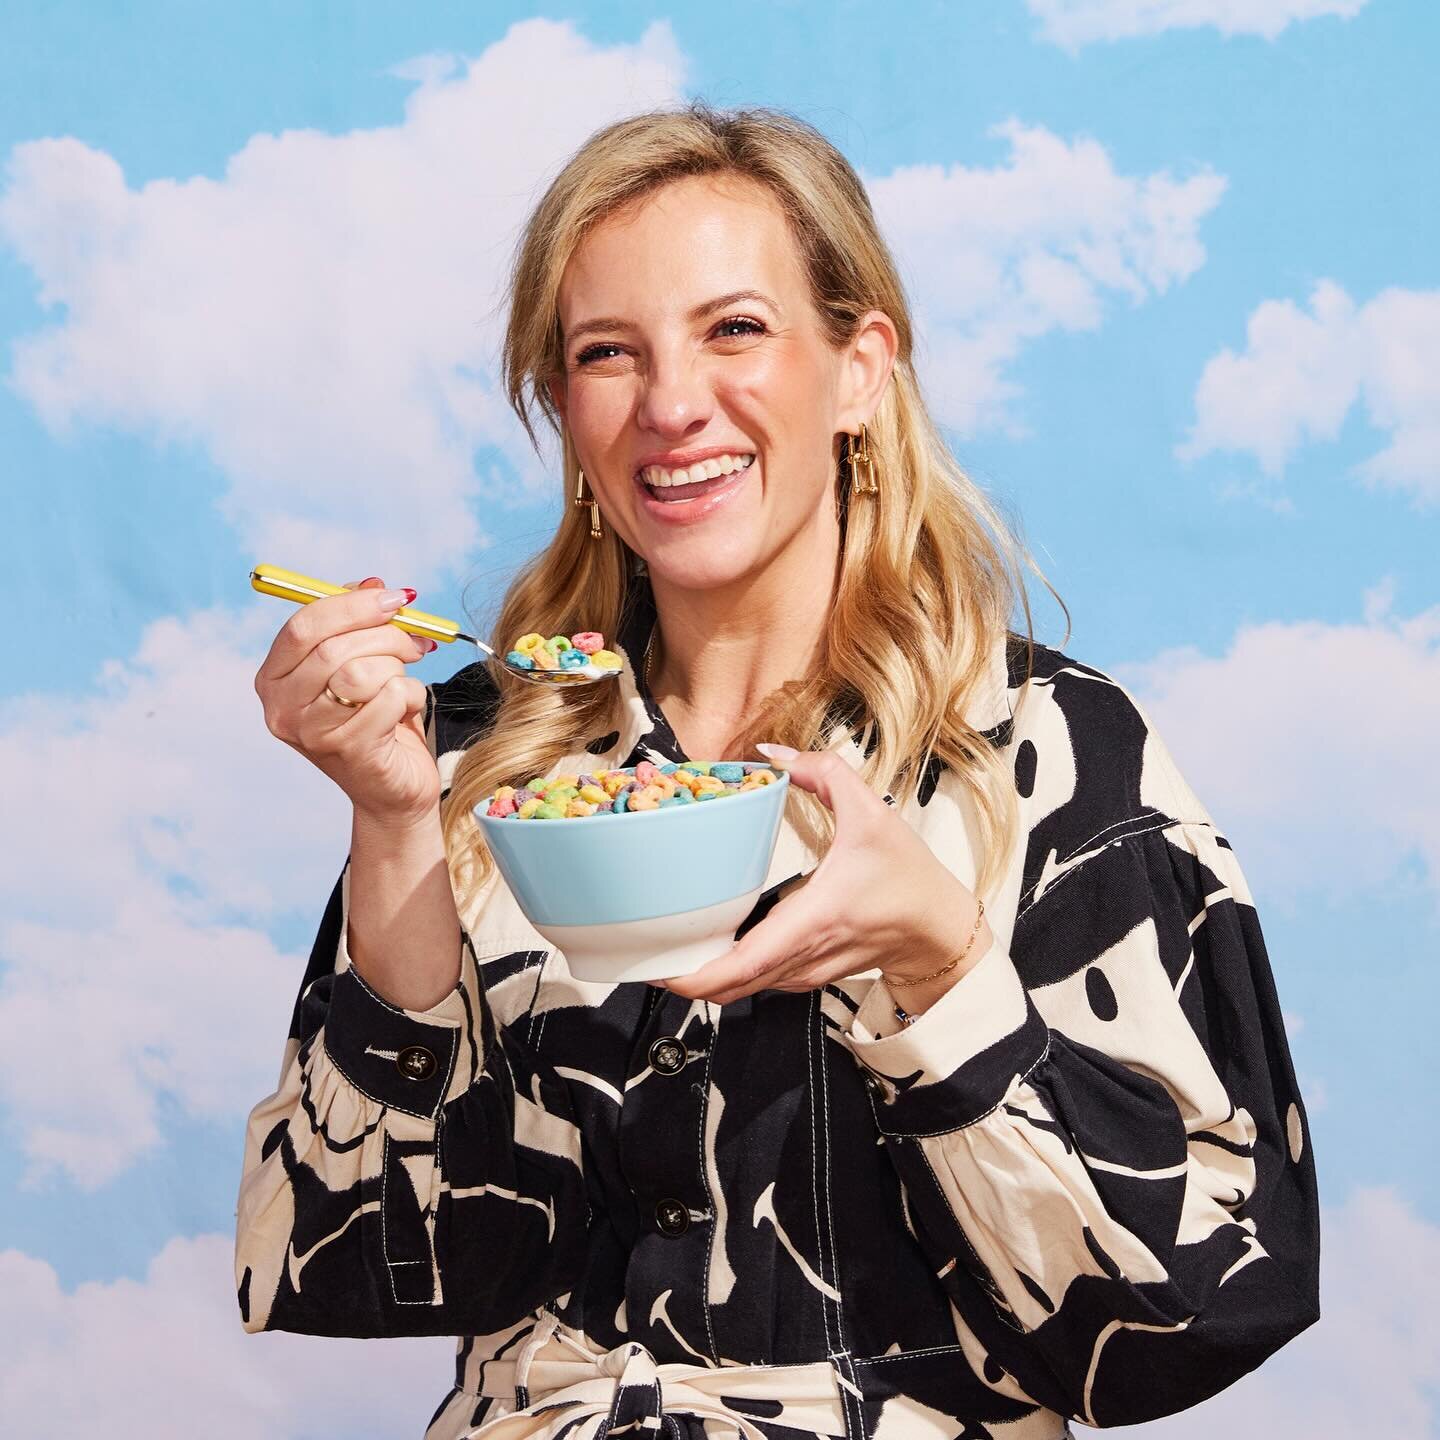 In honor of #nationalcerealday , here I am awkwardly posing for a new profile picture! Which one is your favorite? ⁣
⁣
📸 : ⁣ @ericamaeallen 
⛅️: ⁣ @amsies 
🥣: ⁣ @the_foodartist 
💄:⁣ @_sammysingleton_